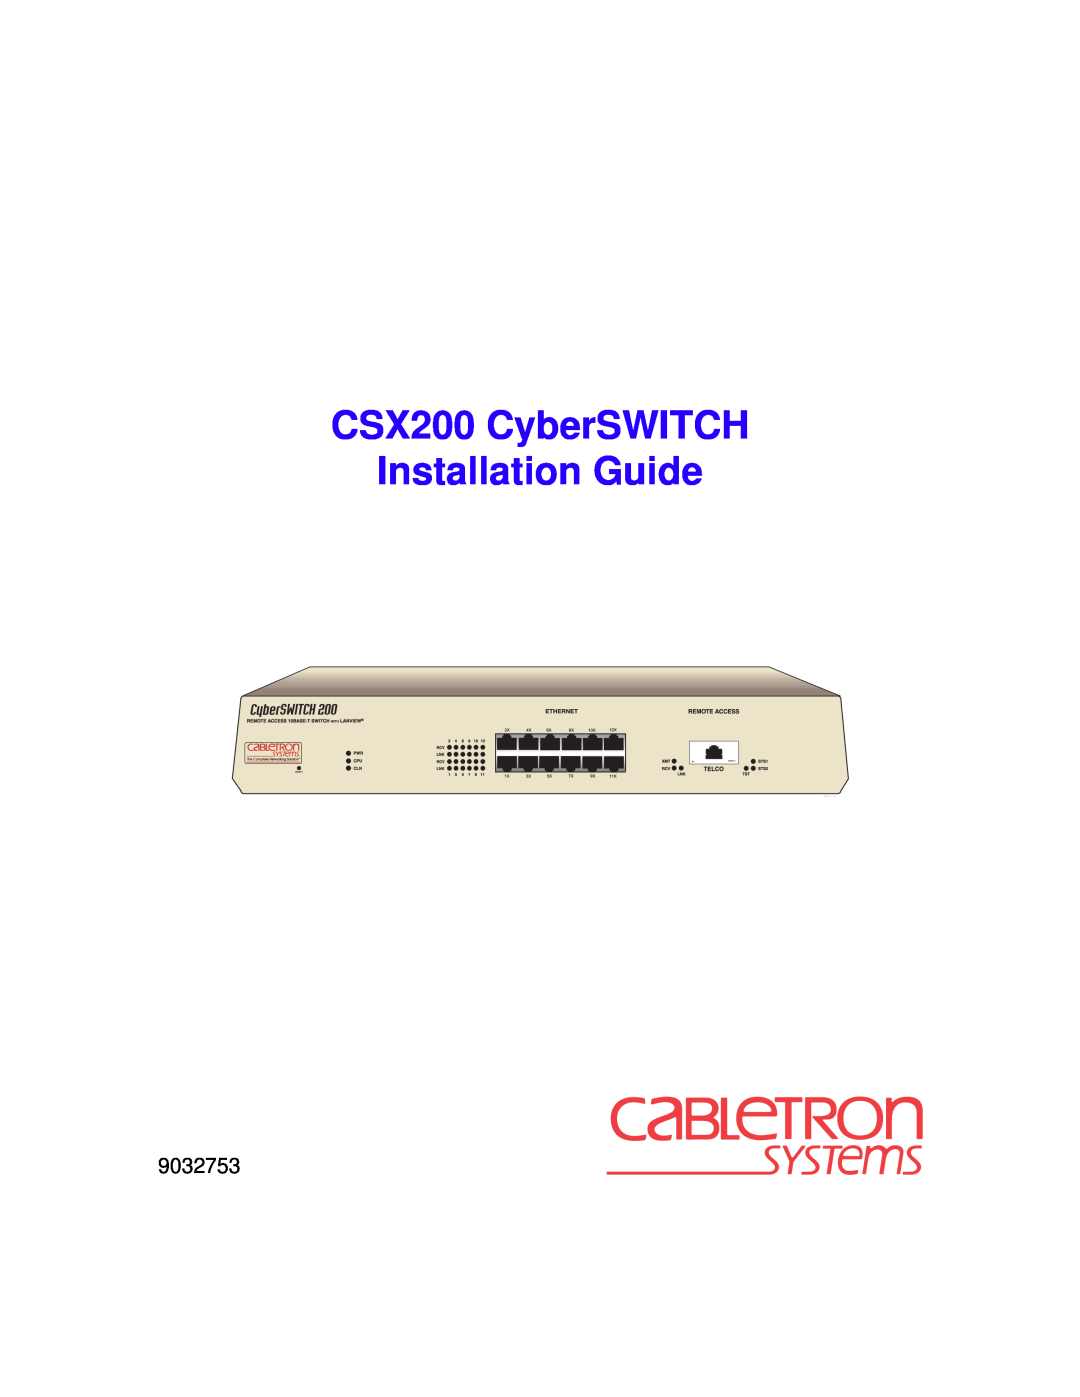 Cabletron Systems manual CSX200 CyberSWITCH Installation Guide, 9032753 